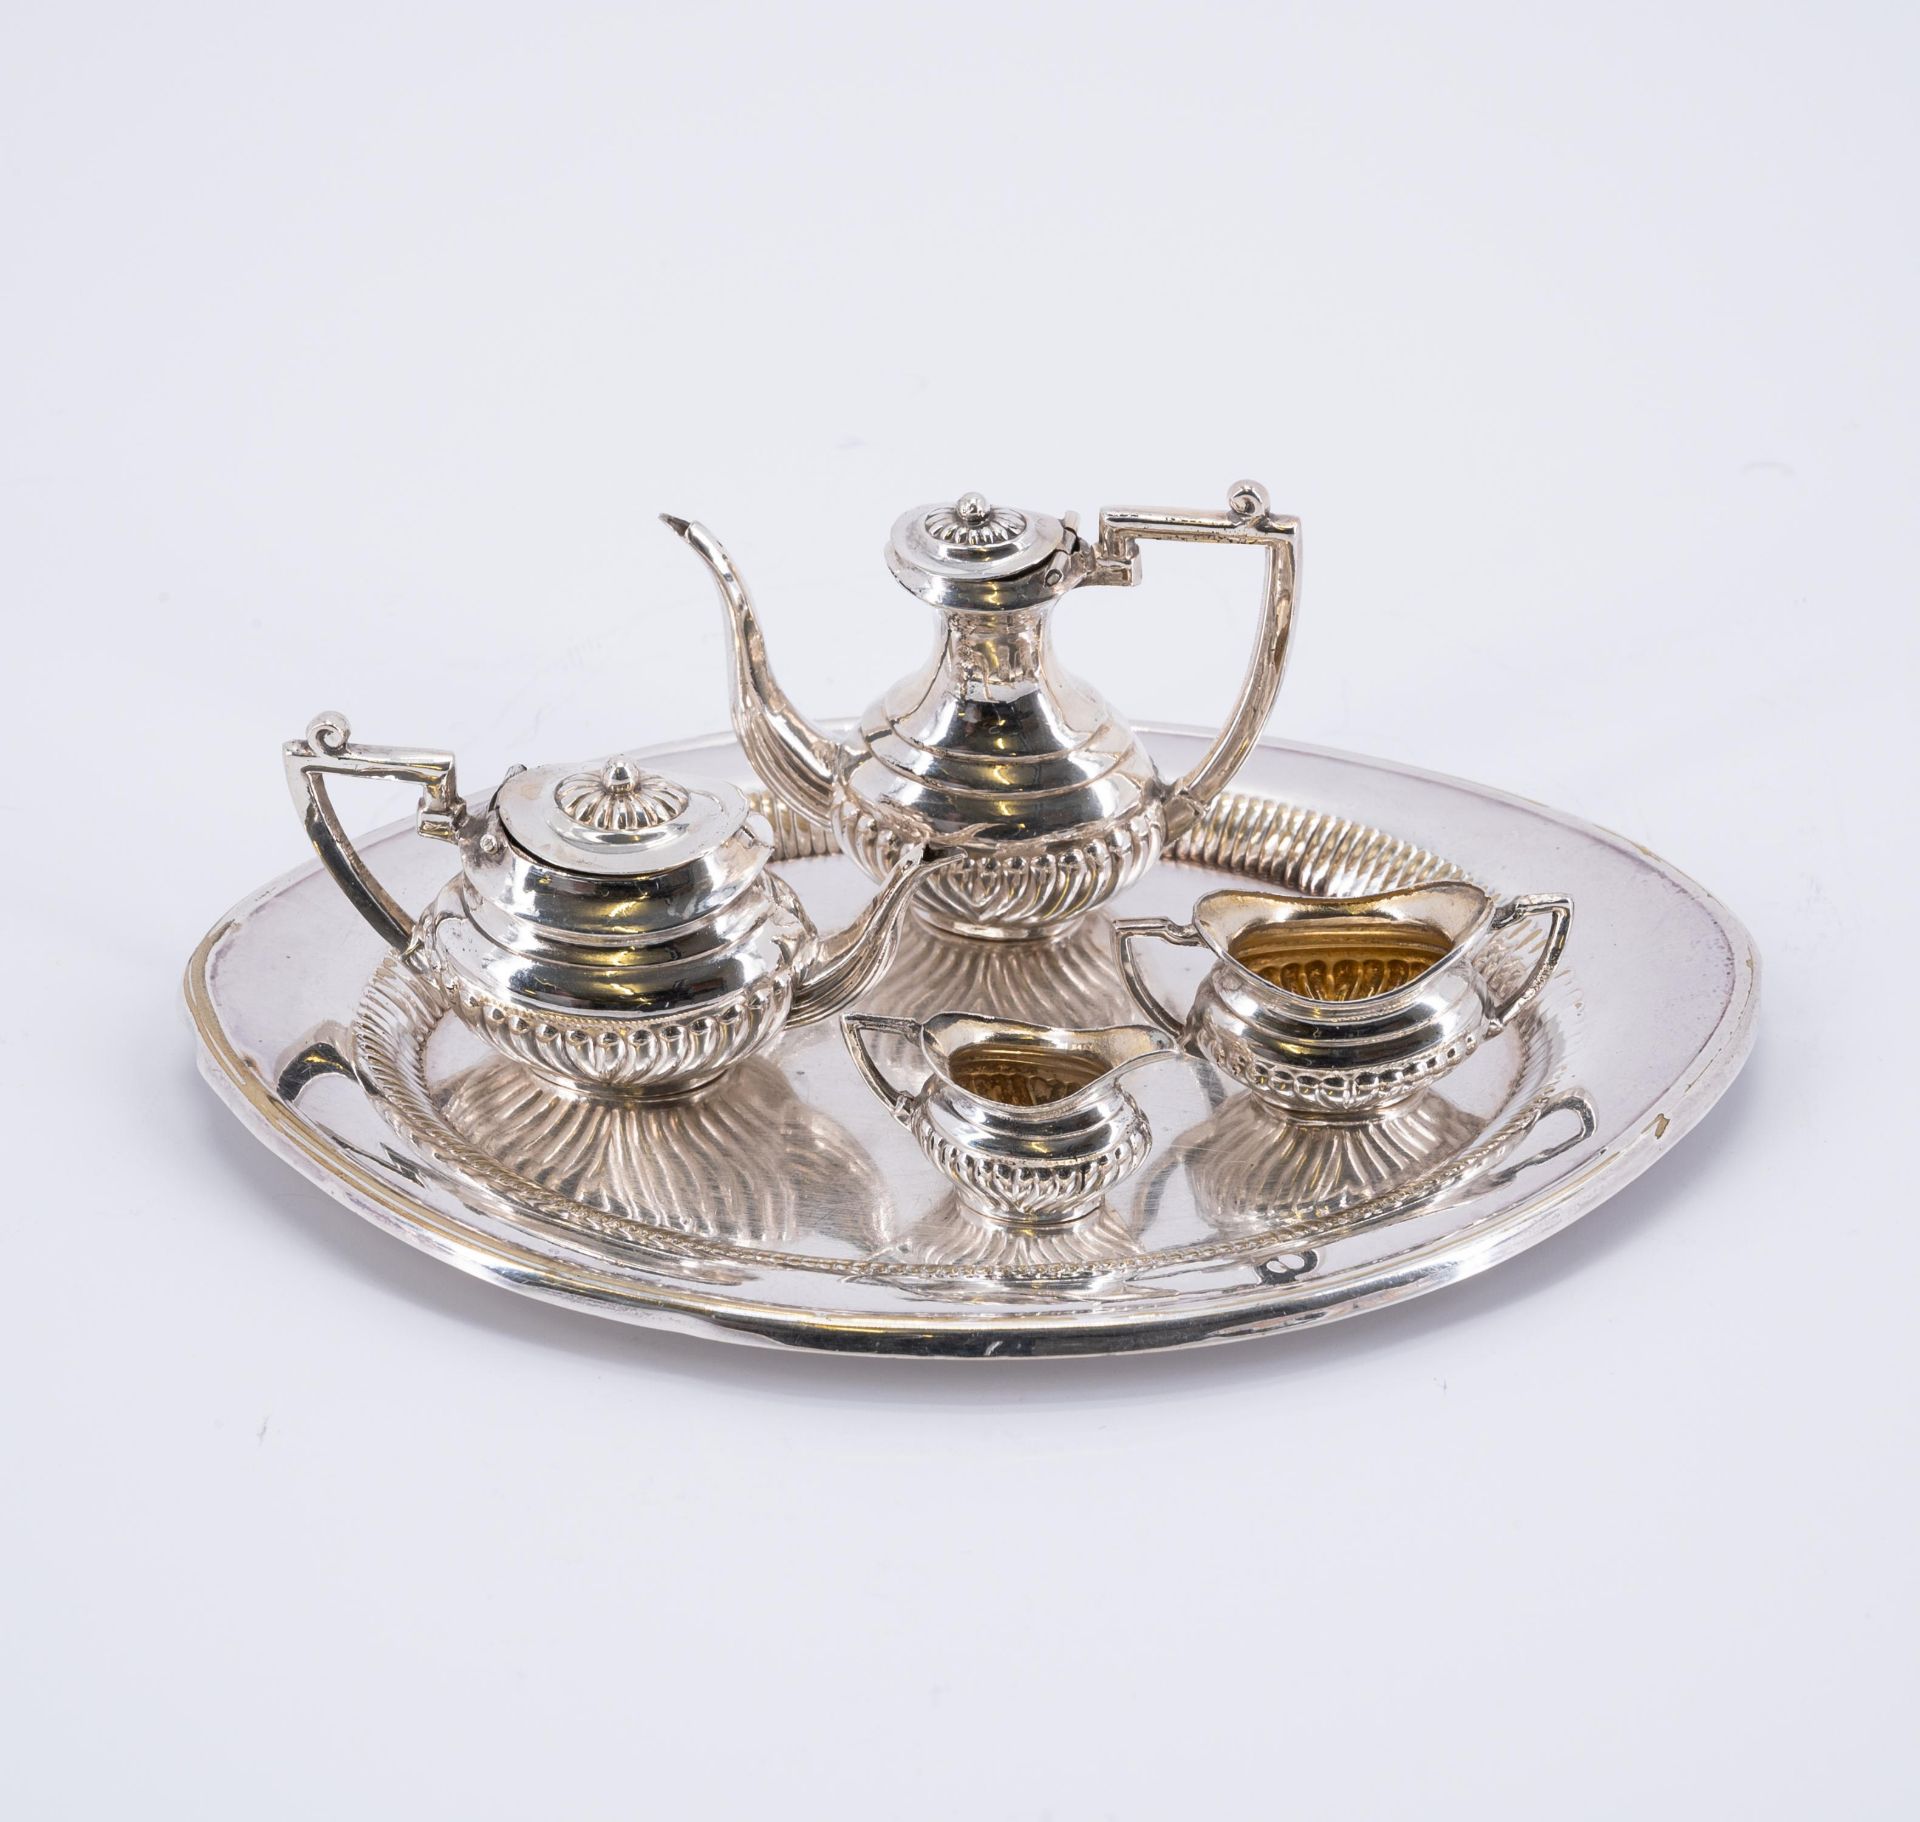 TWO SILVER MINIATURE SERVICES, SILVER MINIATURE CHOCOLADE POT, SILVER MINIATURE DUSTPAN - Image 4 of 7